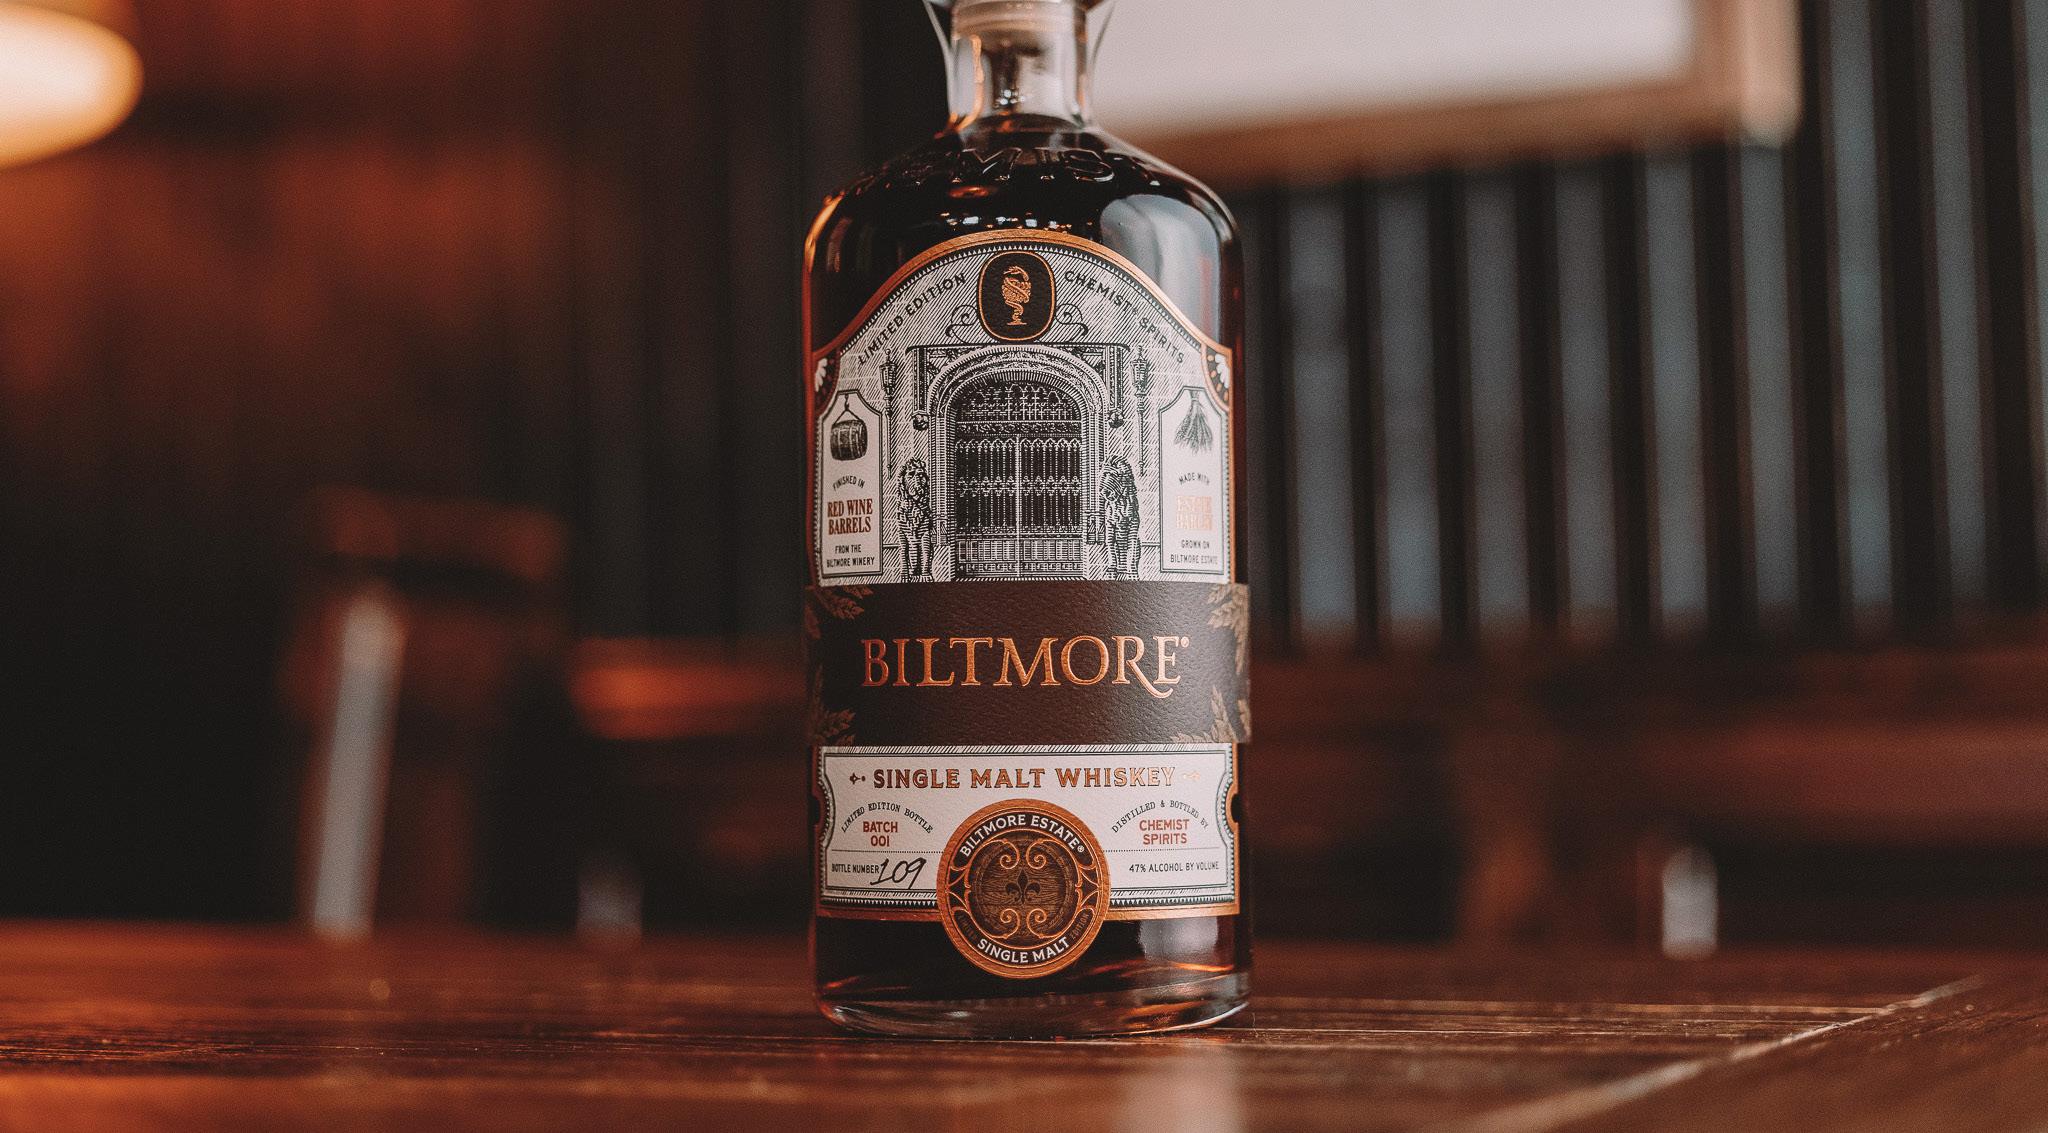 Which type of whiskey is often made with a mix of malted barley and grains?